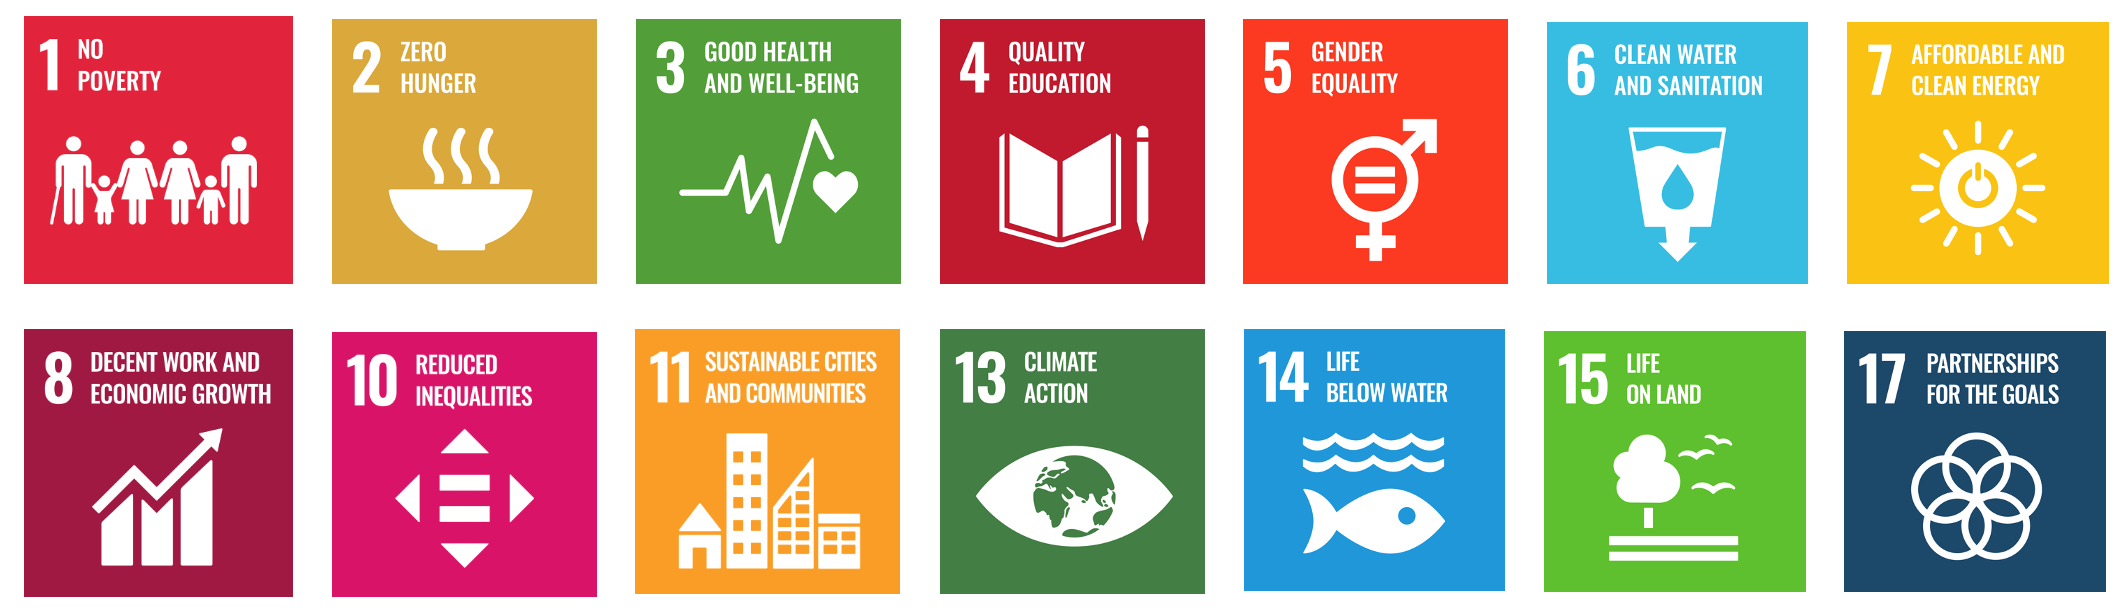 Picture of the UN Sustainable Development Goals